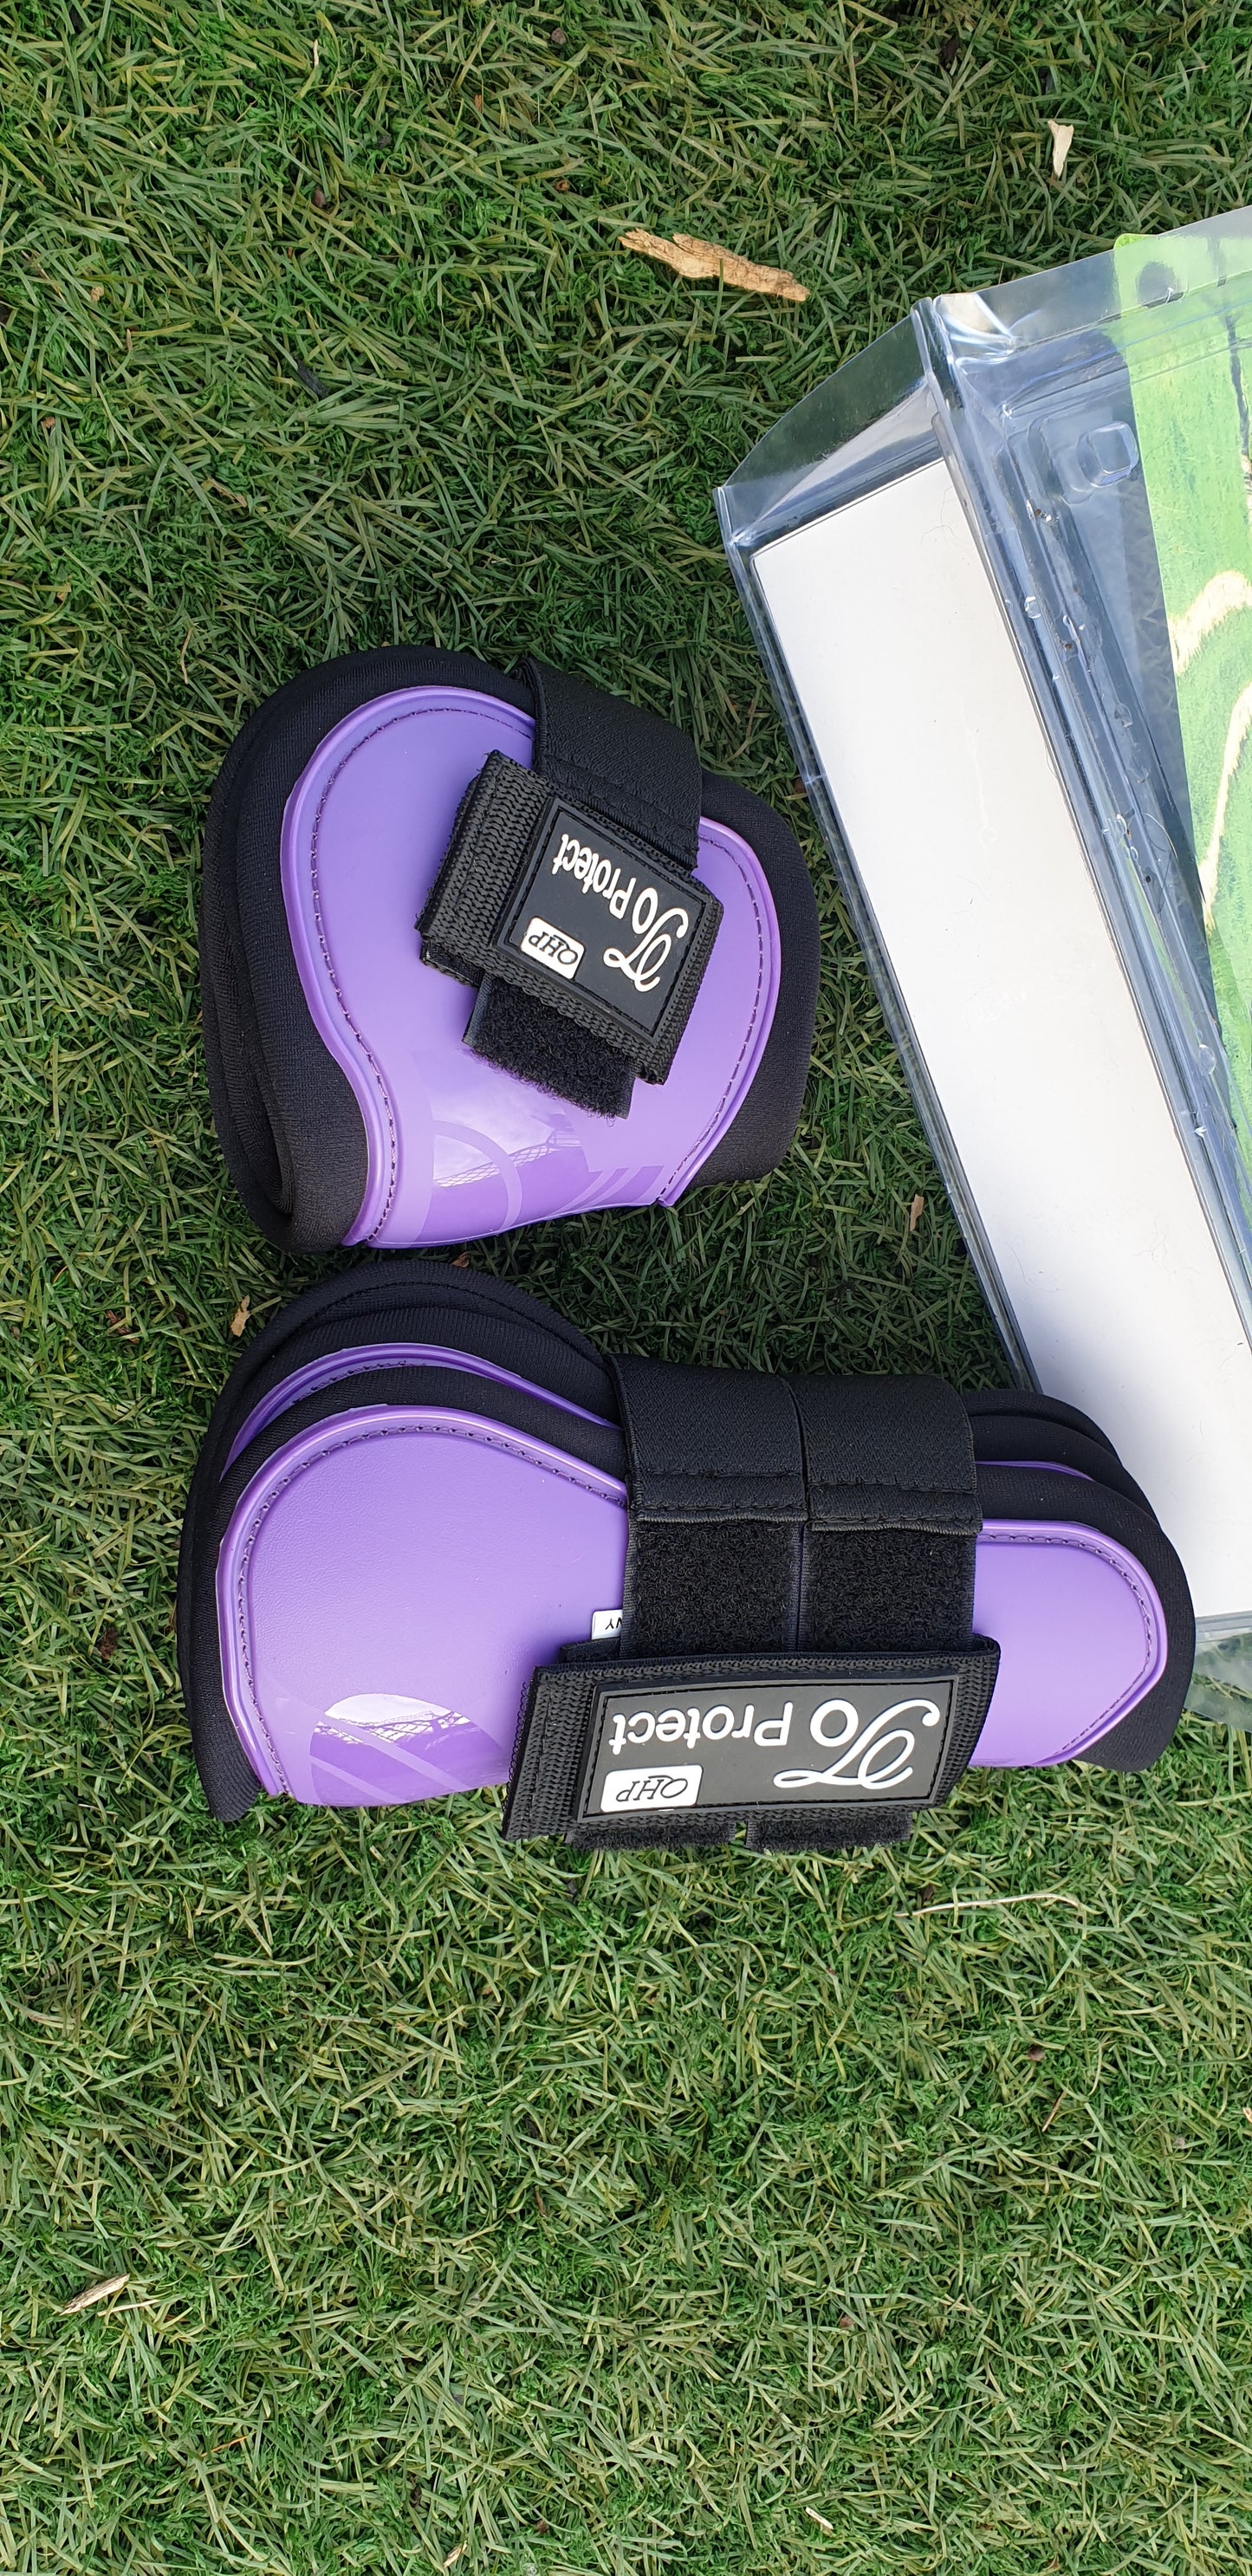 Funky purple Jazz
£30
Set Of 4 Tendon And Fetlock Boots
FREE POSTAGE